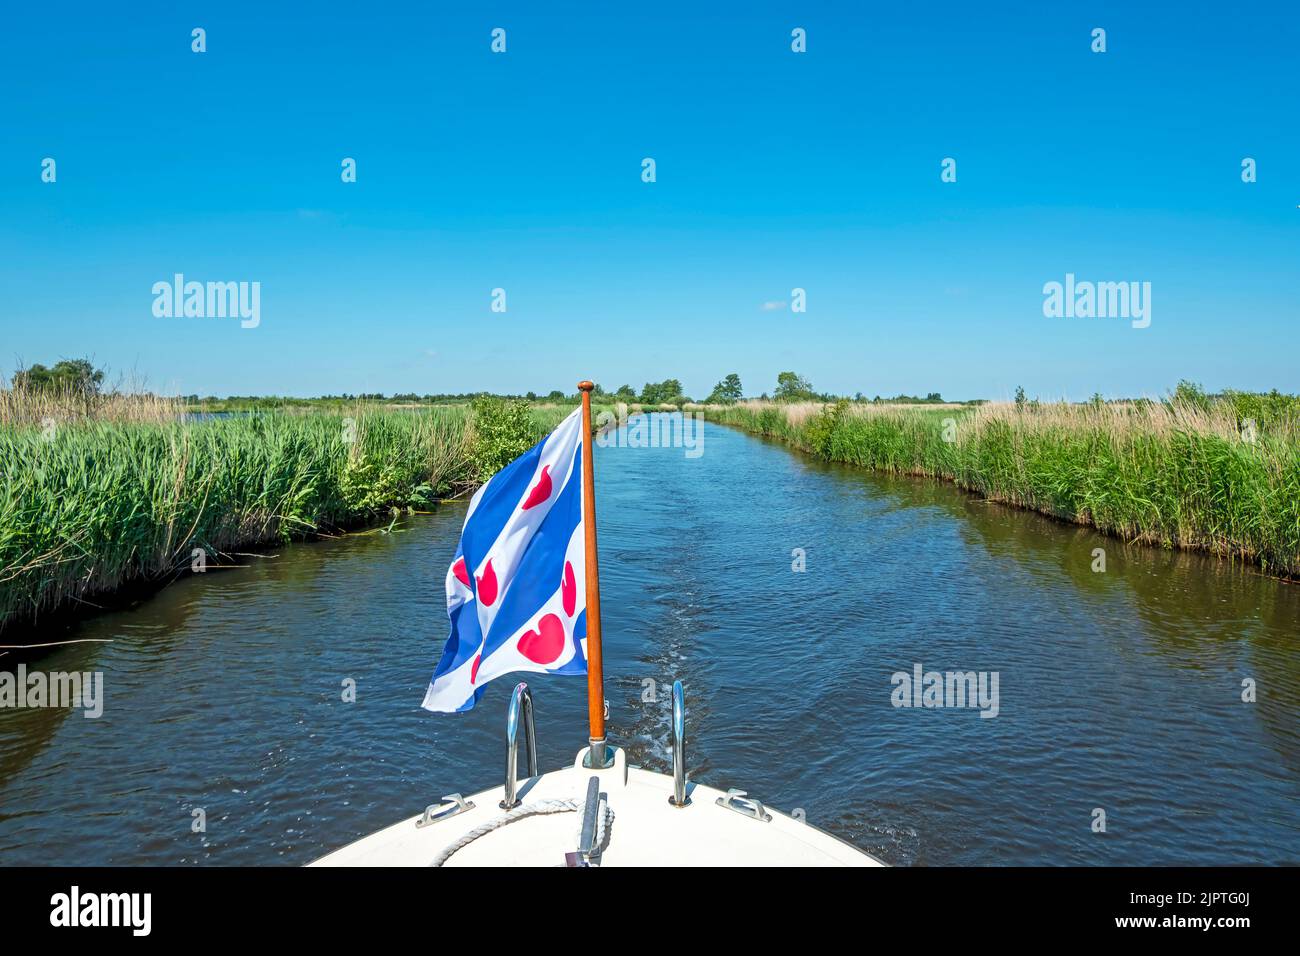 Cruising through National Park Alde Feanen in Friesland the Netherlands with the frisian flag Stock Photo